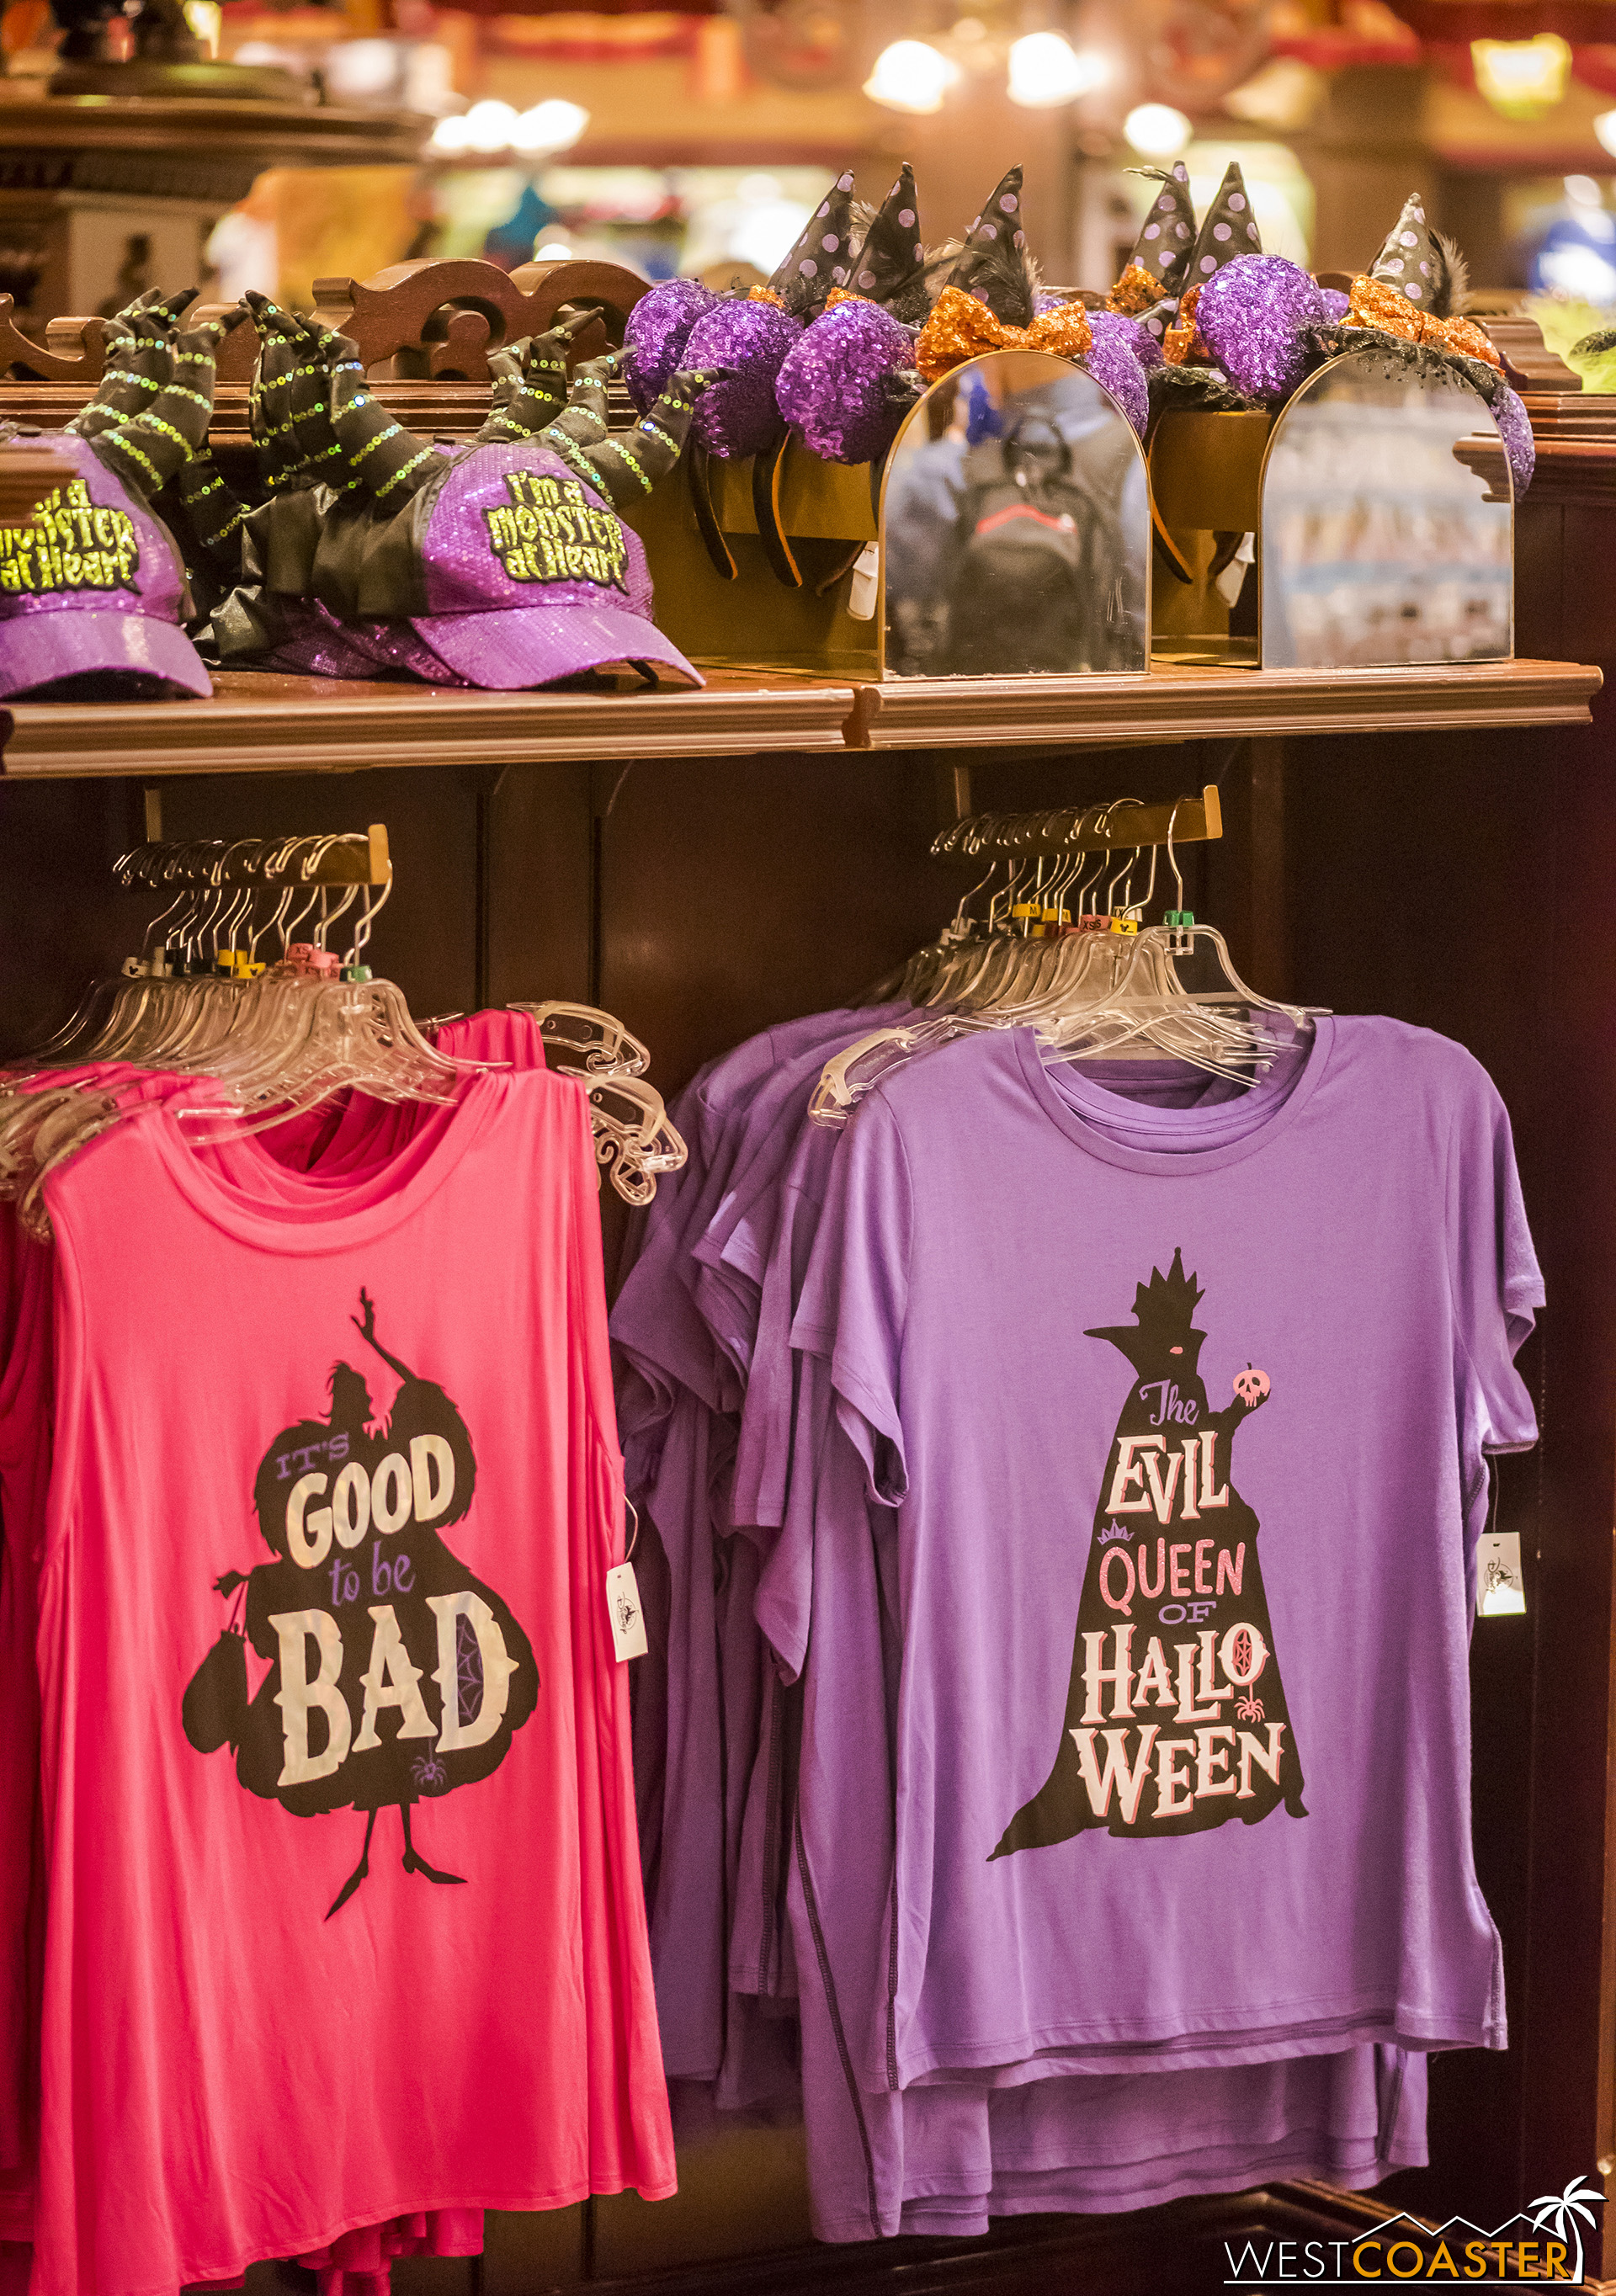  There is a ton of Halloween merchandise at Disneyland, including stuff apparently marketed toward millennials culture? 